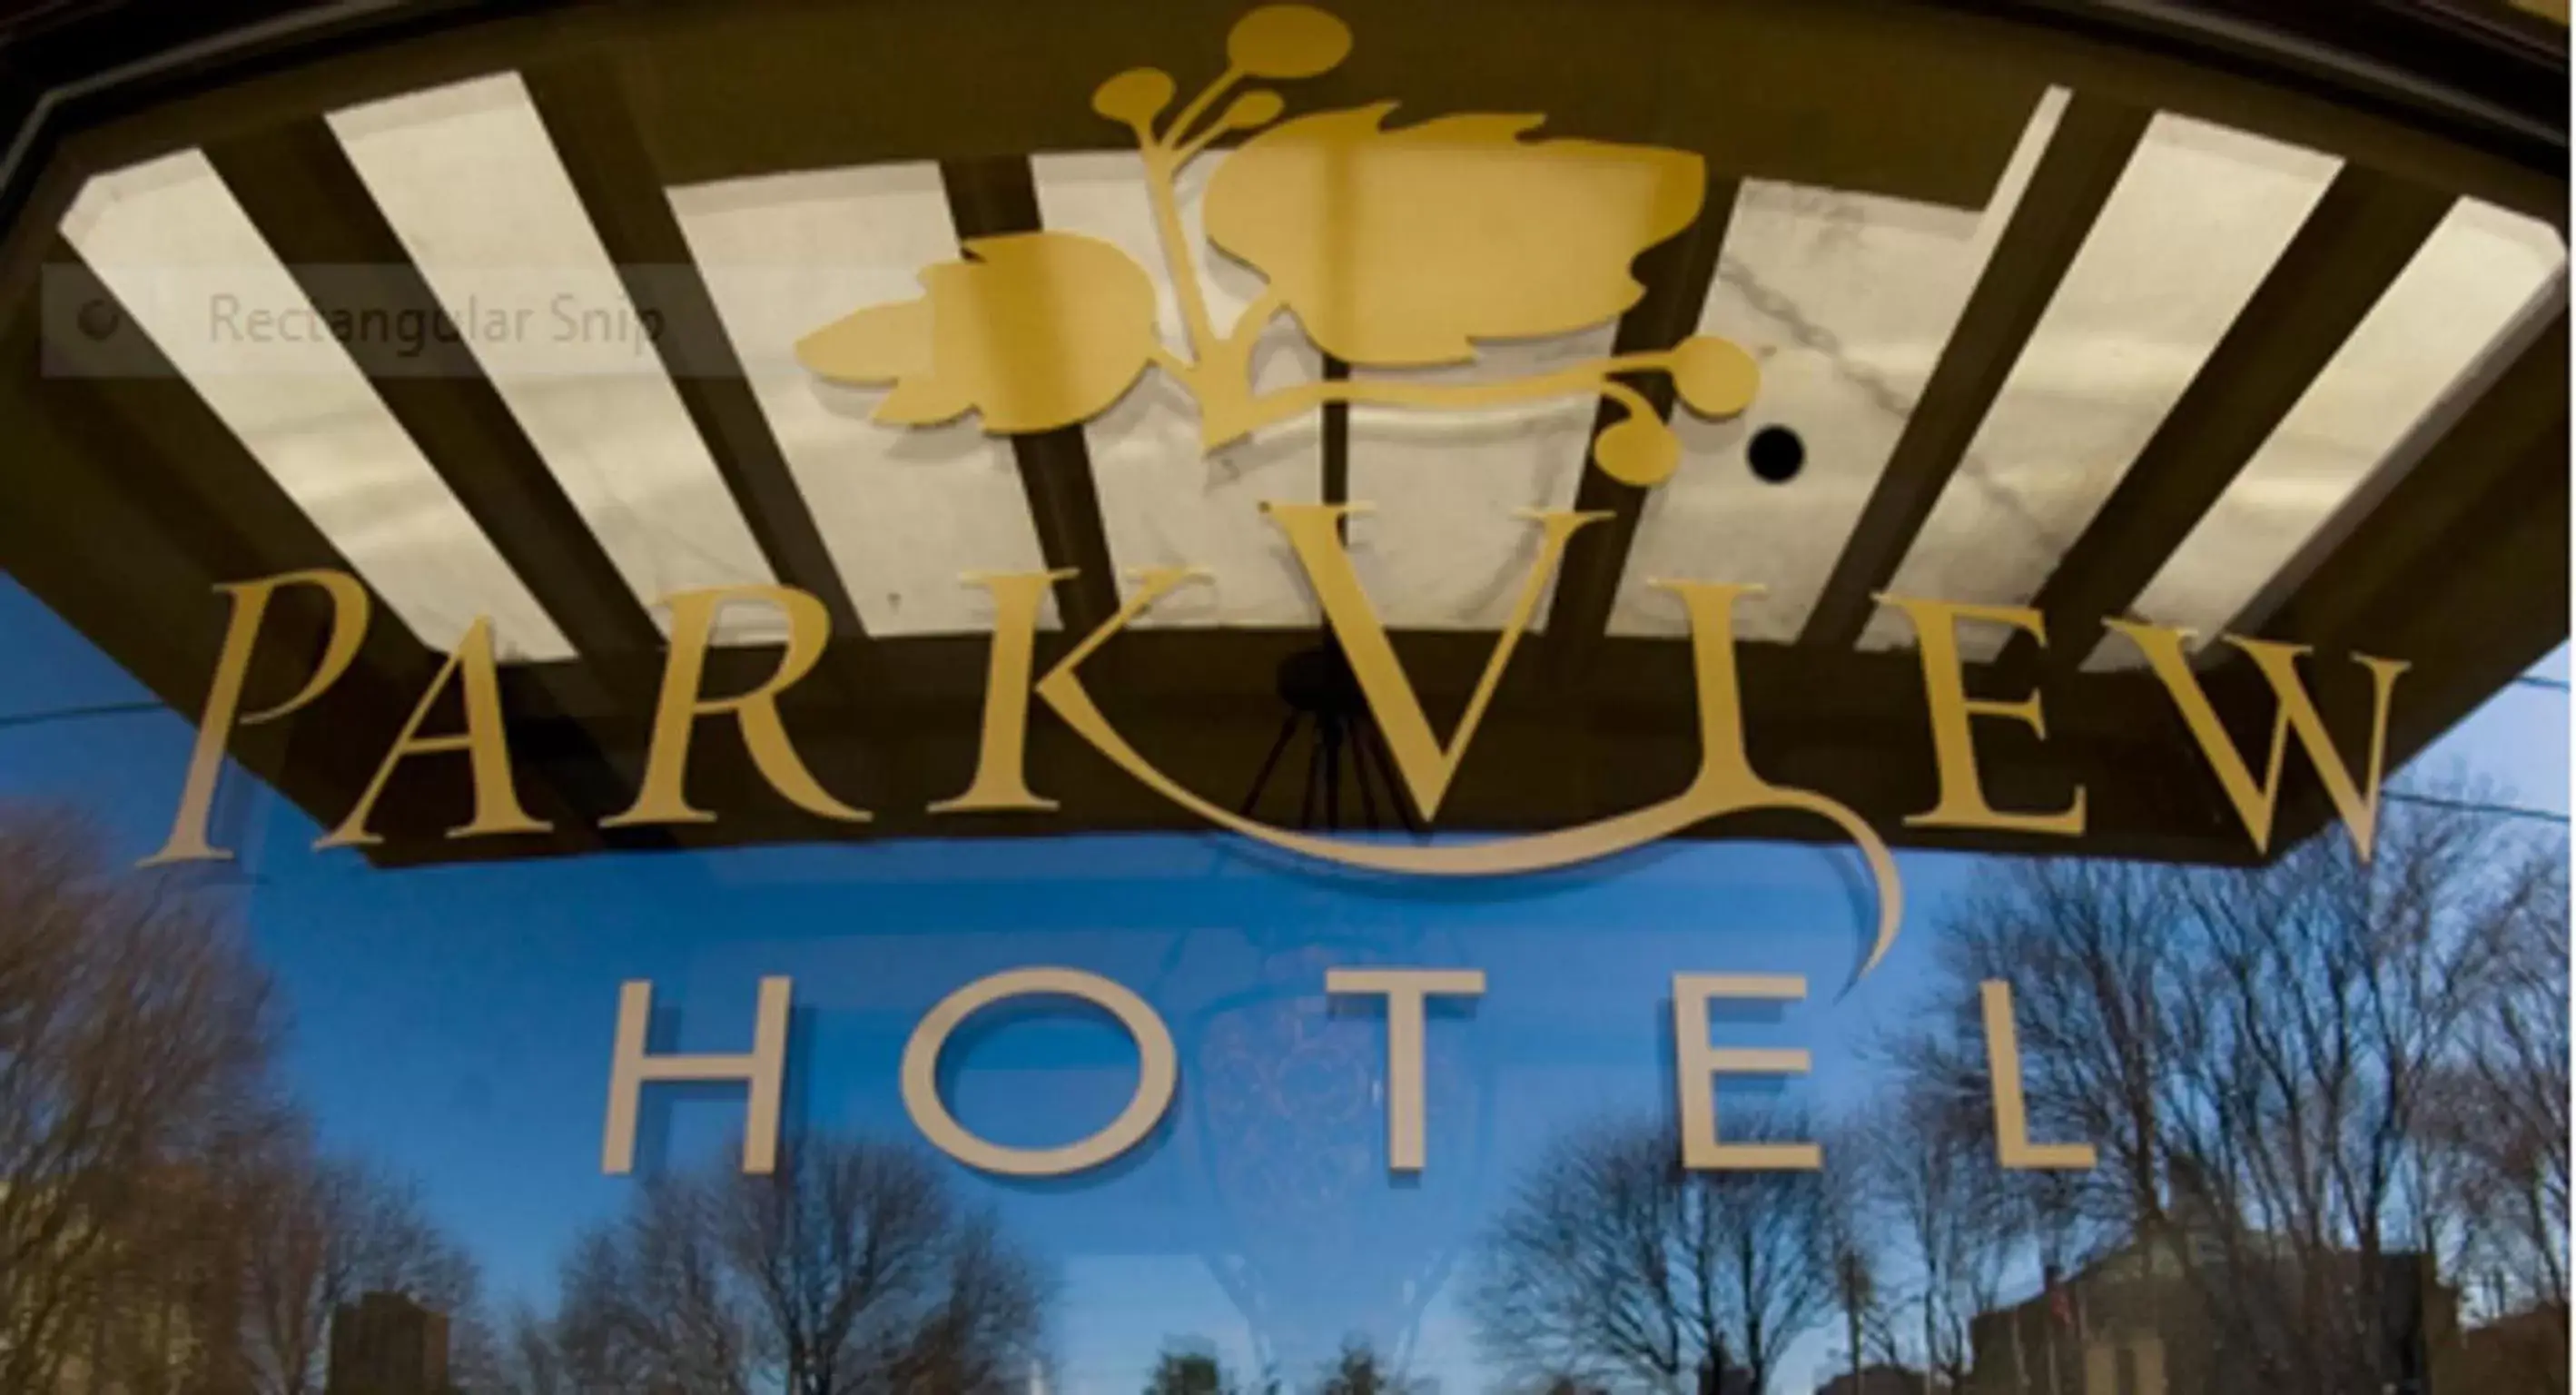 Decorative detail in The Parkview Hotel